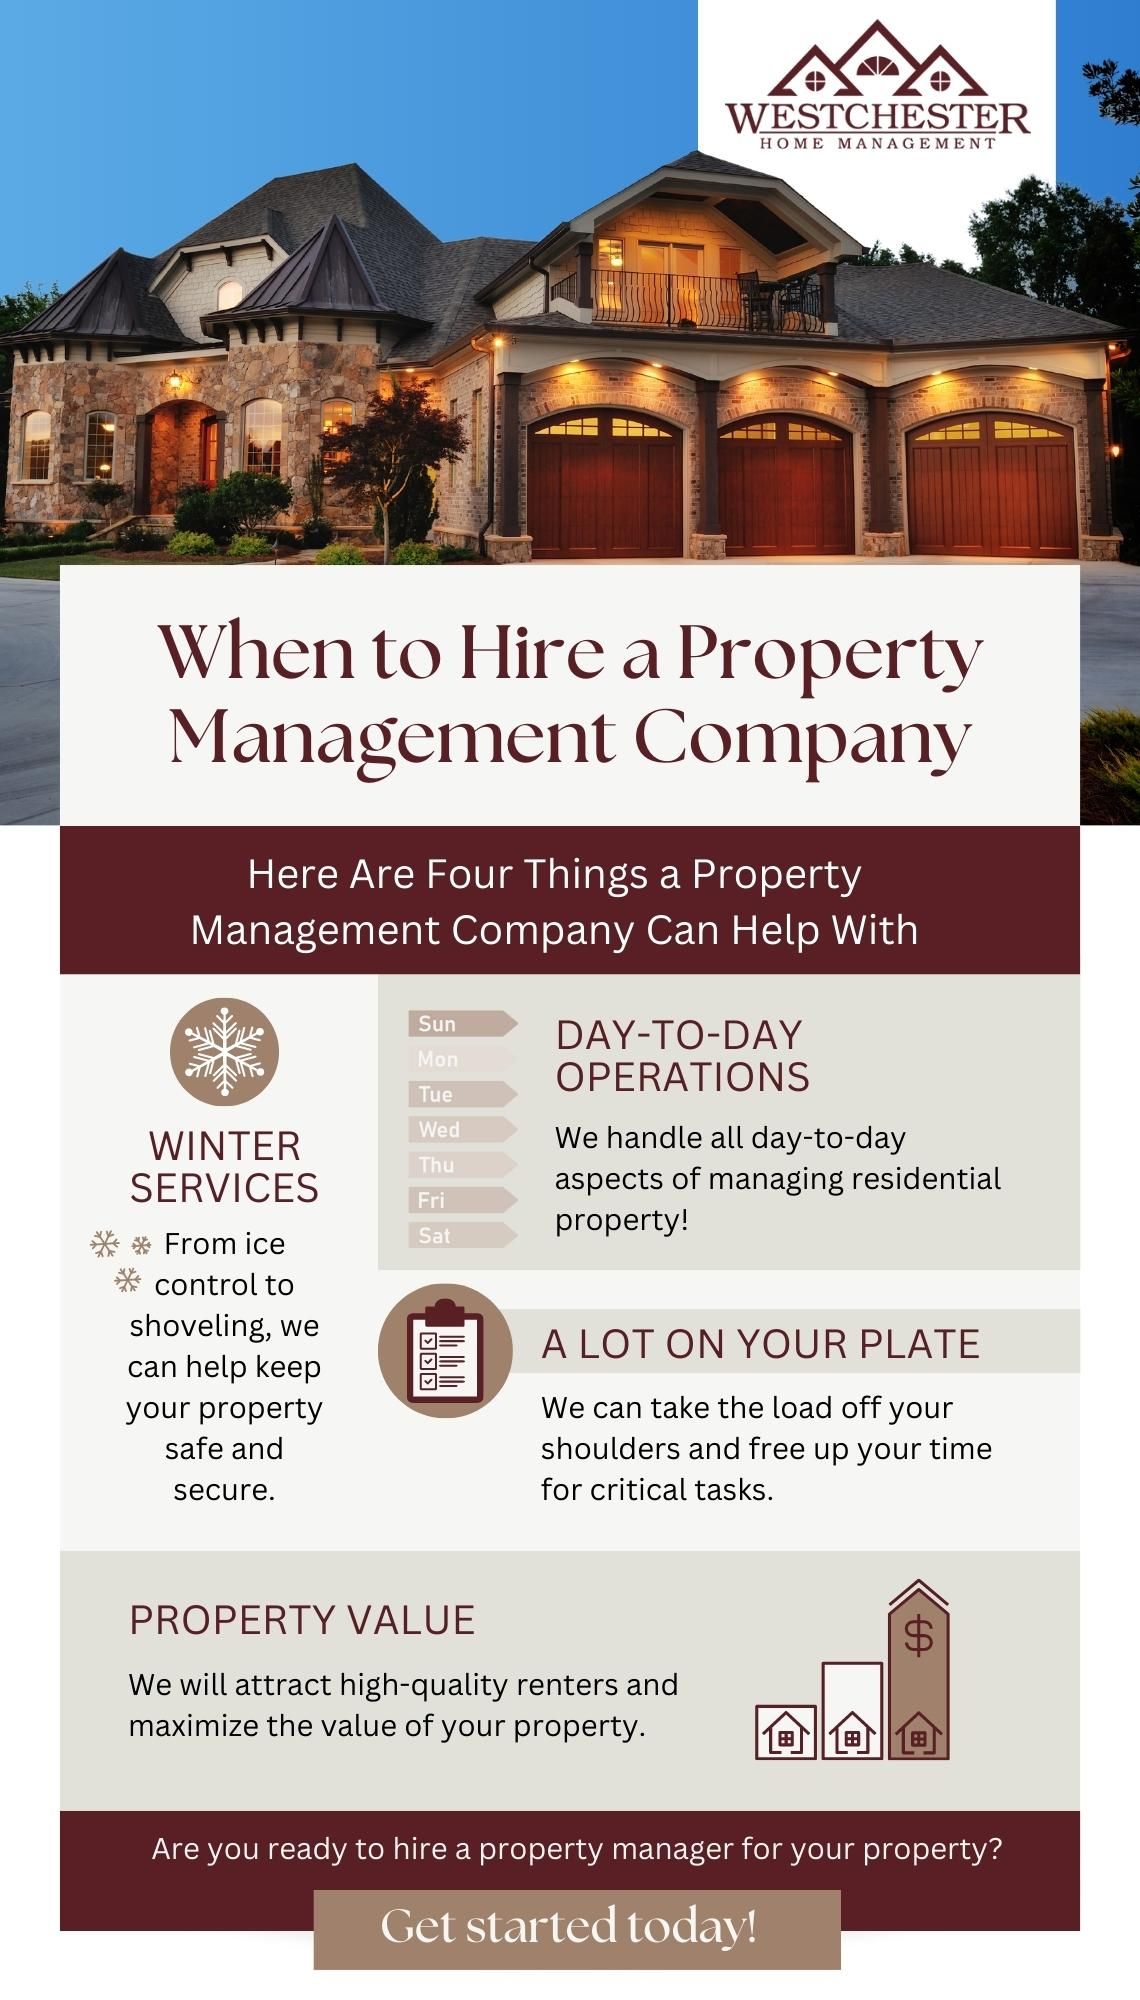 M30208 -IG--When to Hire a Property Management Company.jpg